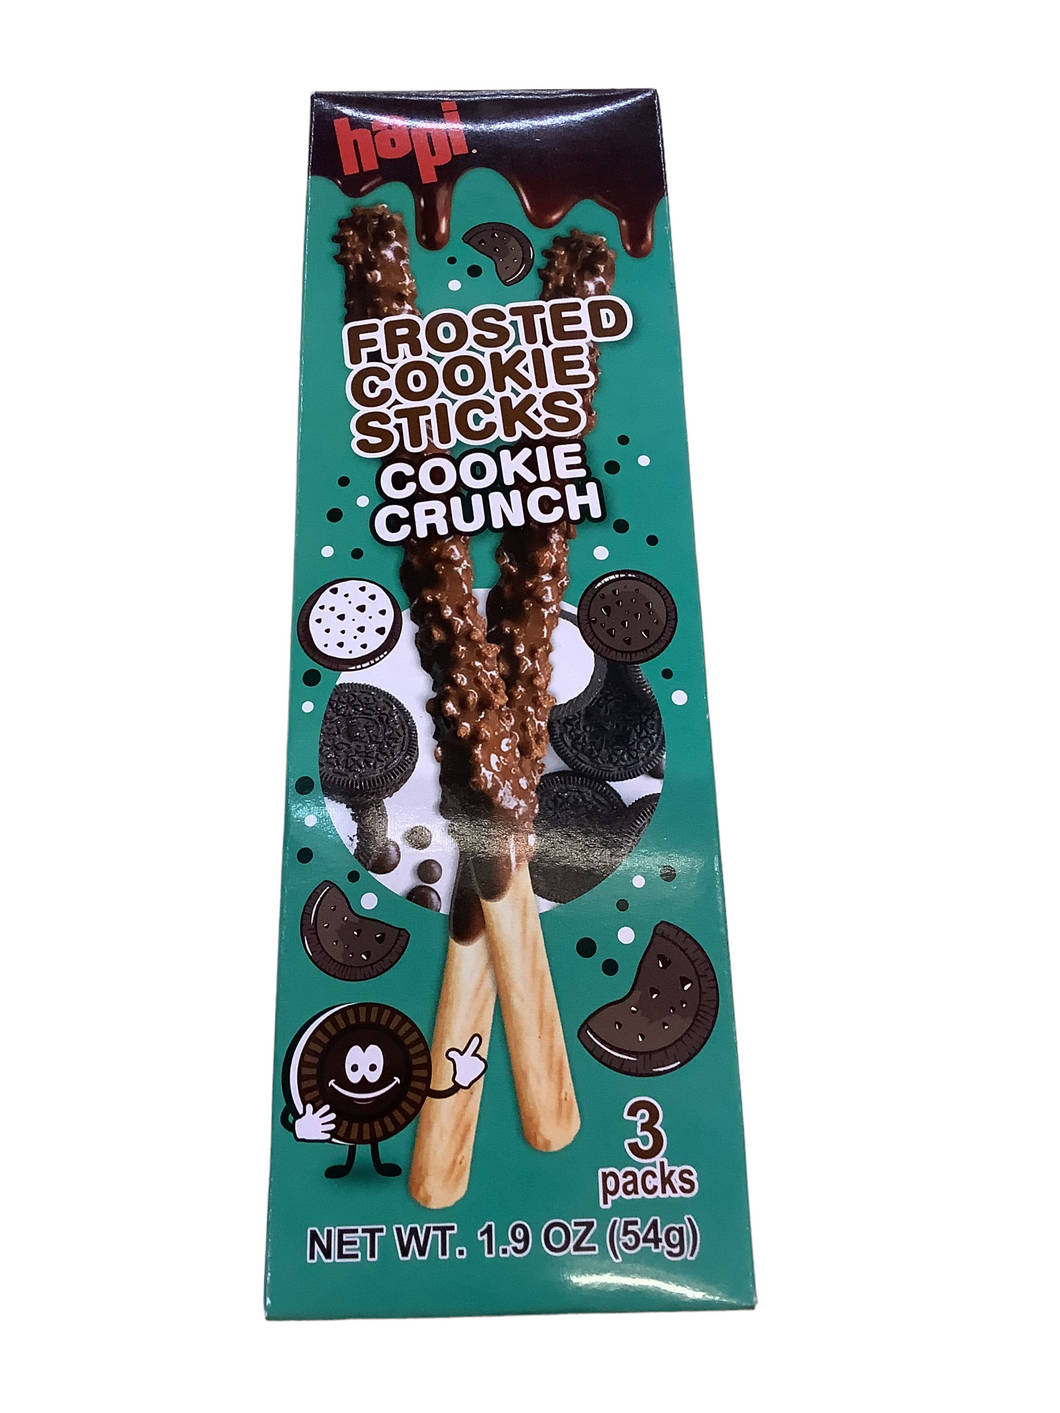 Hapi Frosted Cookie Sticks- Cookie Crunch